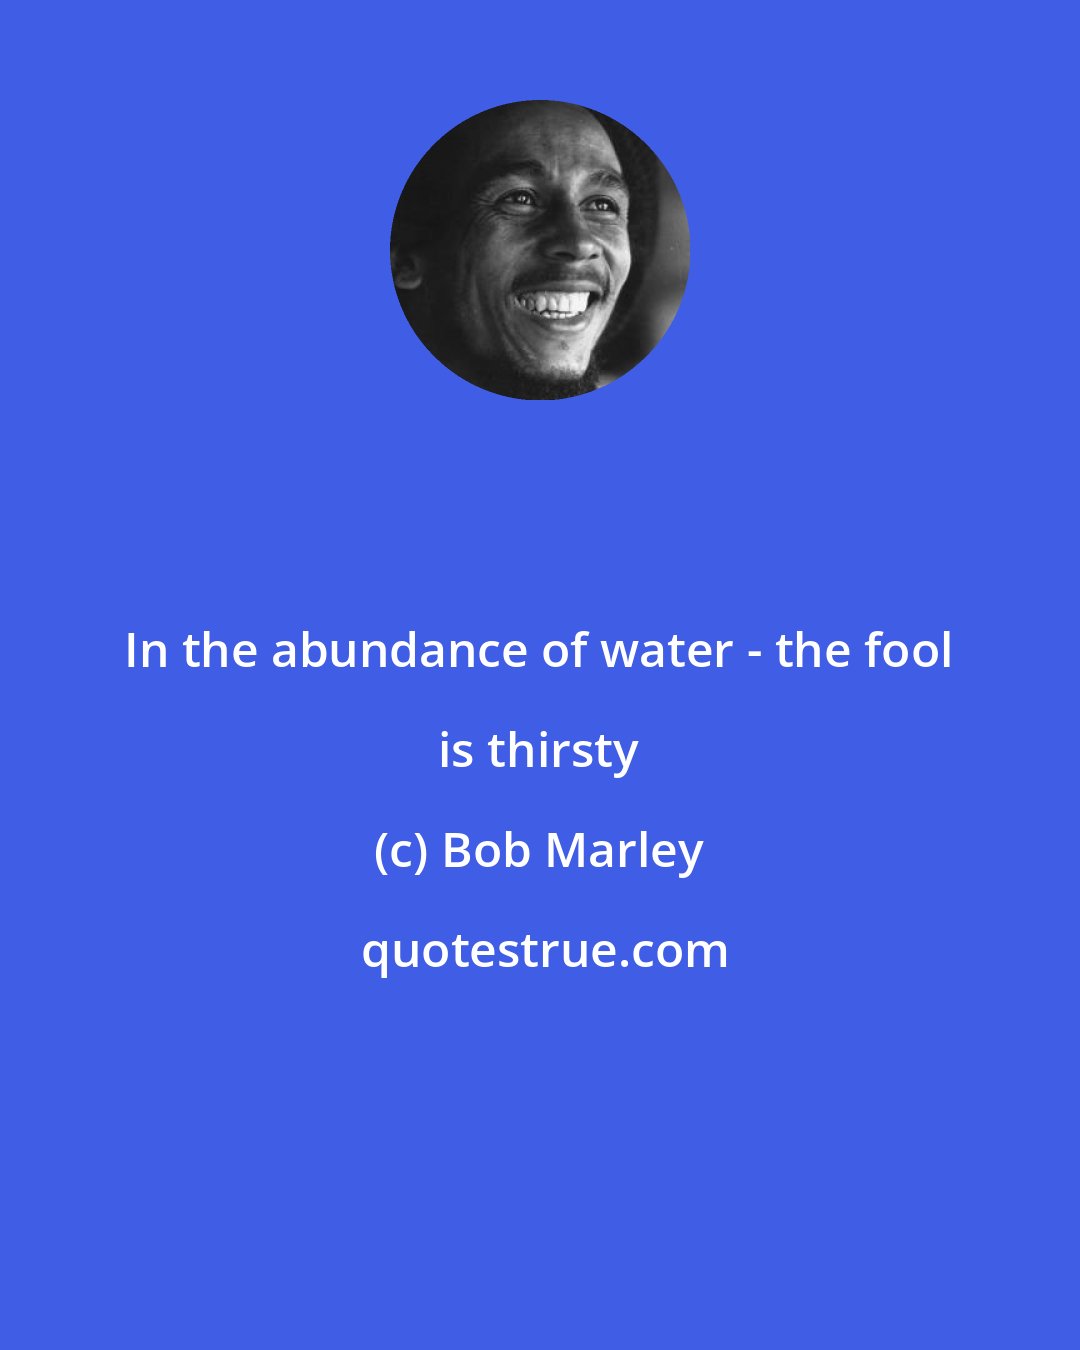 Bob Marley: In the abundance of water - the fool is thirsty